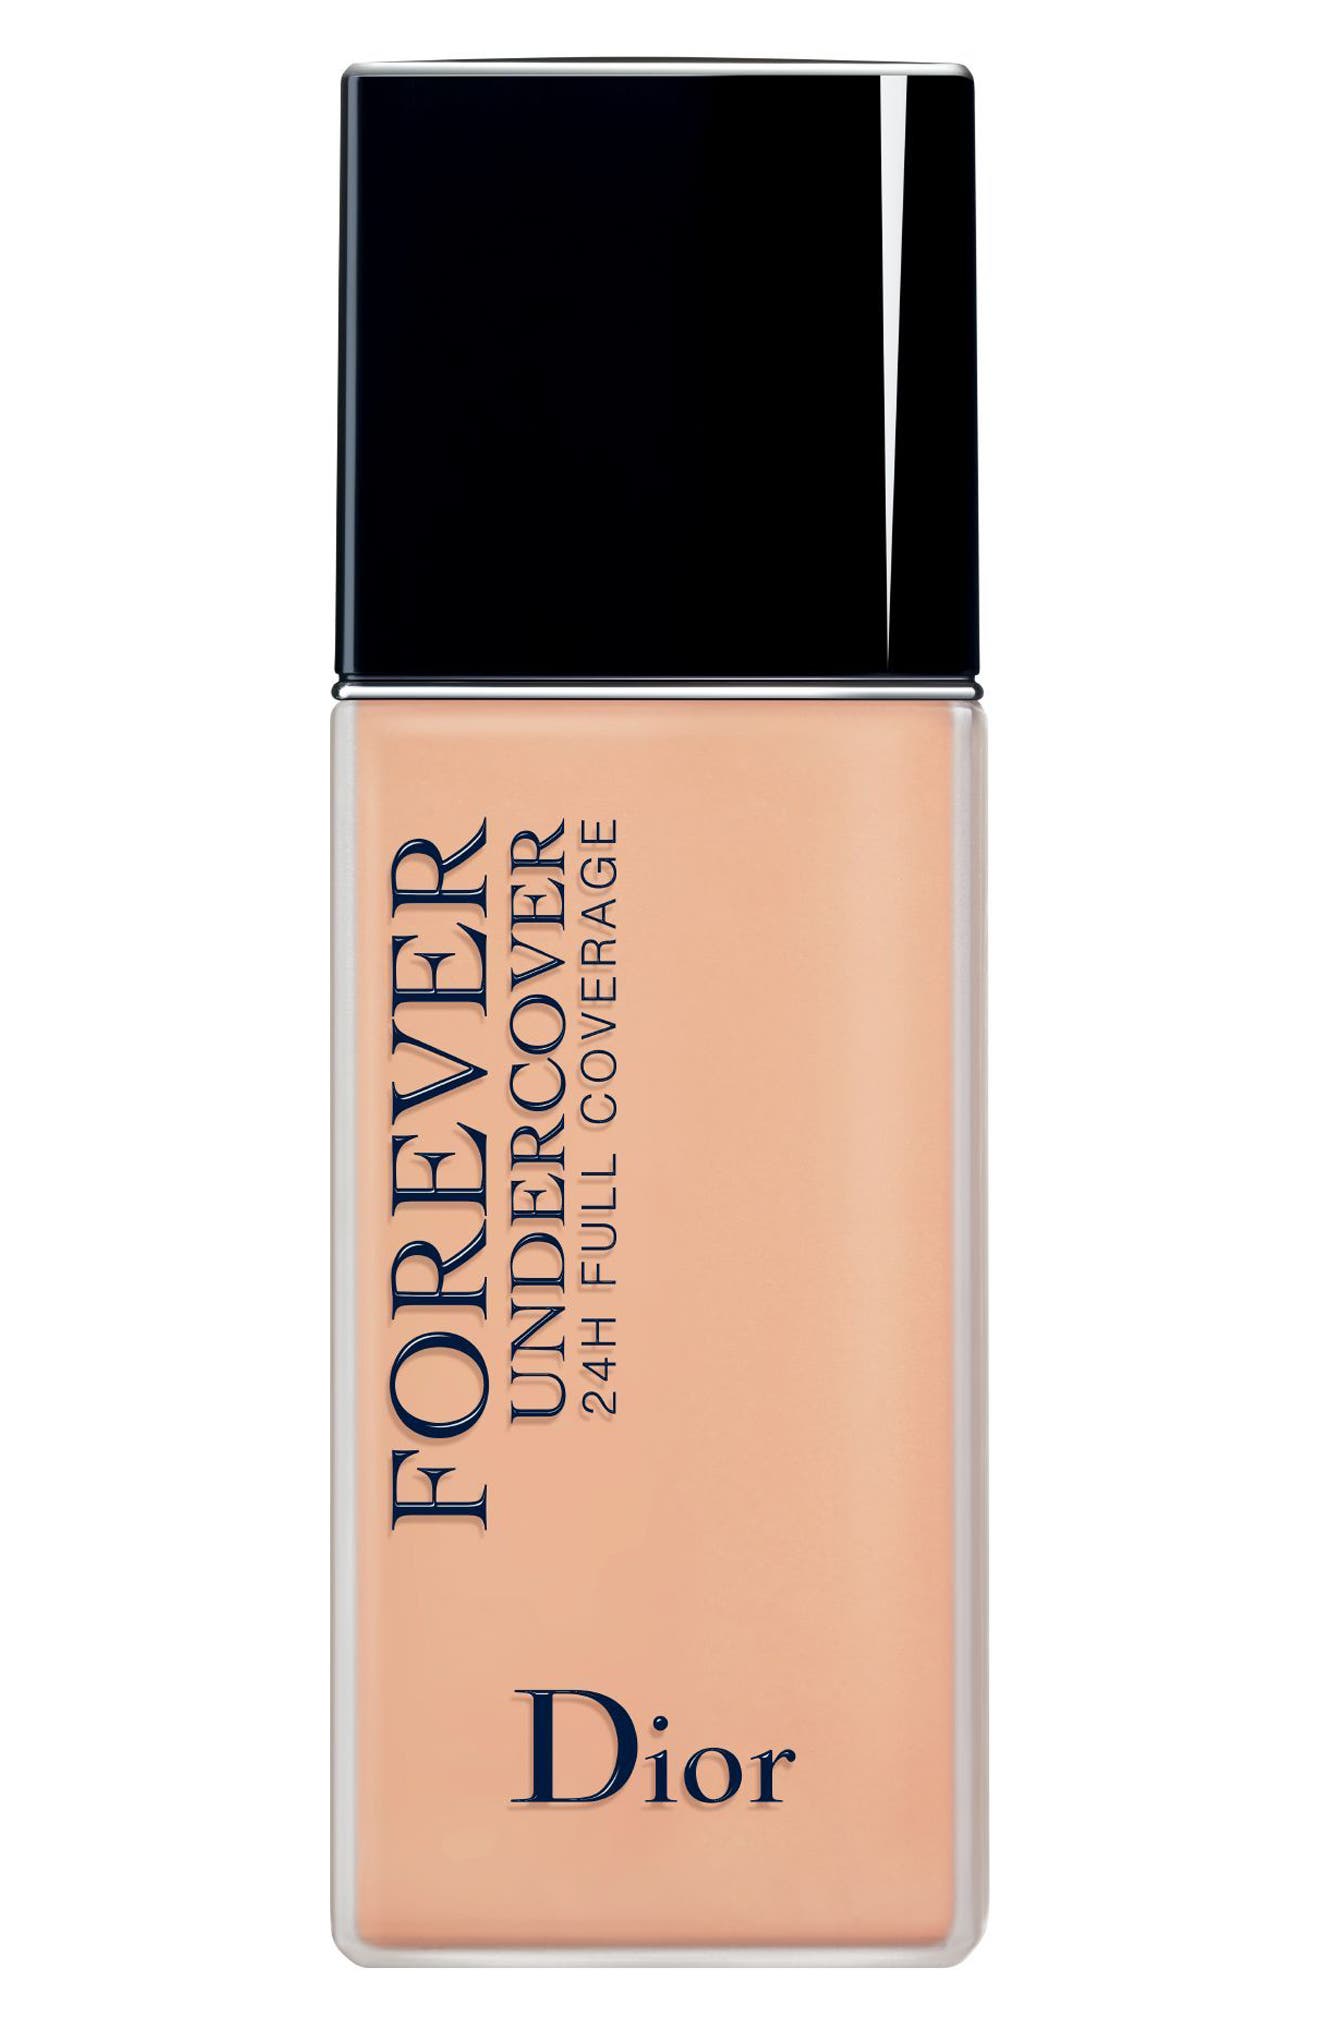 EAN 3348901383578 product image for Dior Diorskin Forever Undercover 24-Hour Full Coverage Liquid Foundation - 030 M | upcitemdb.com